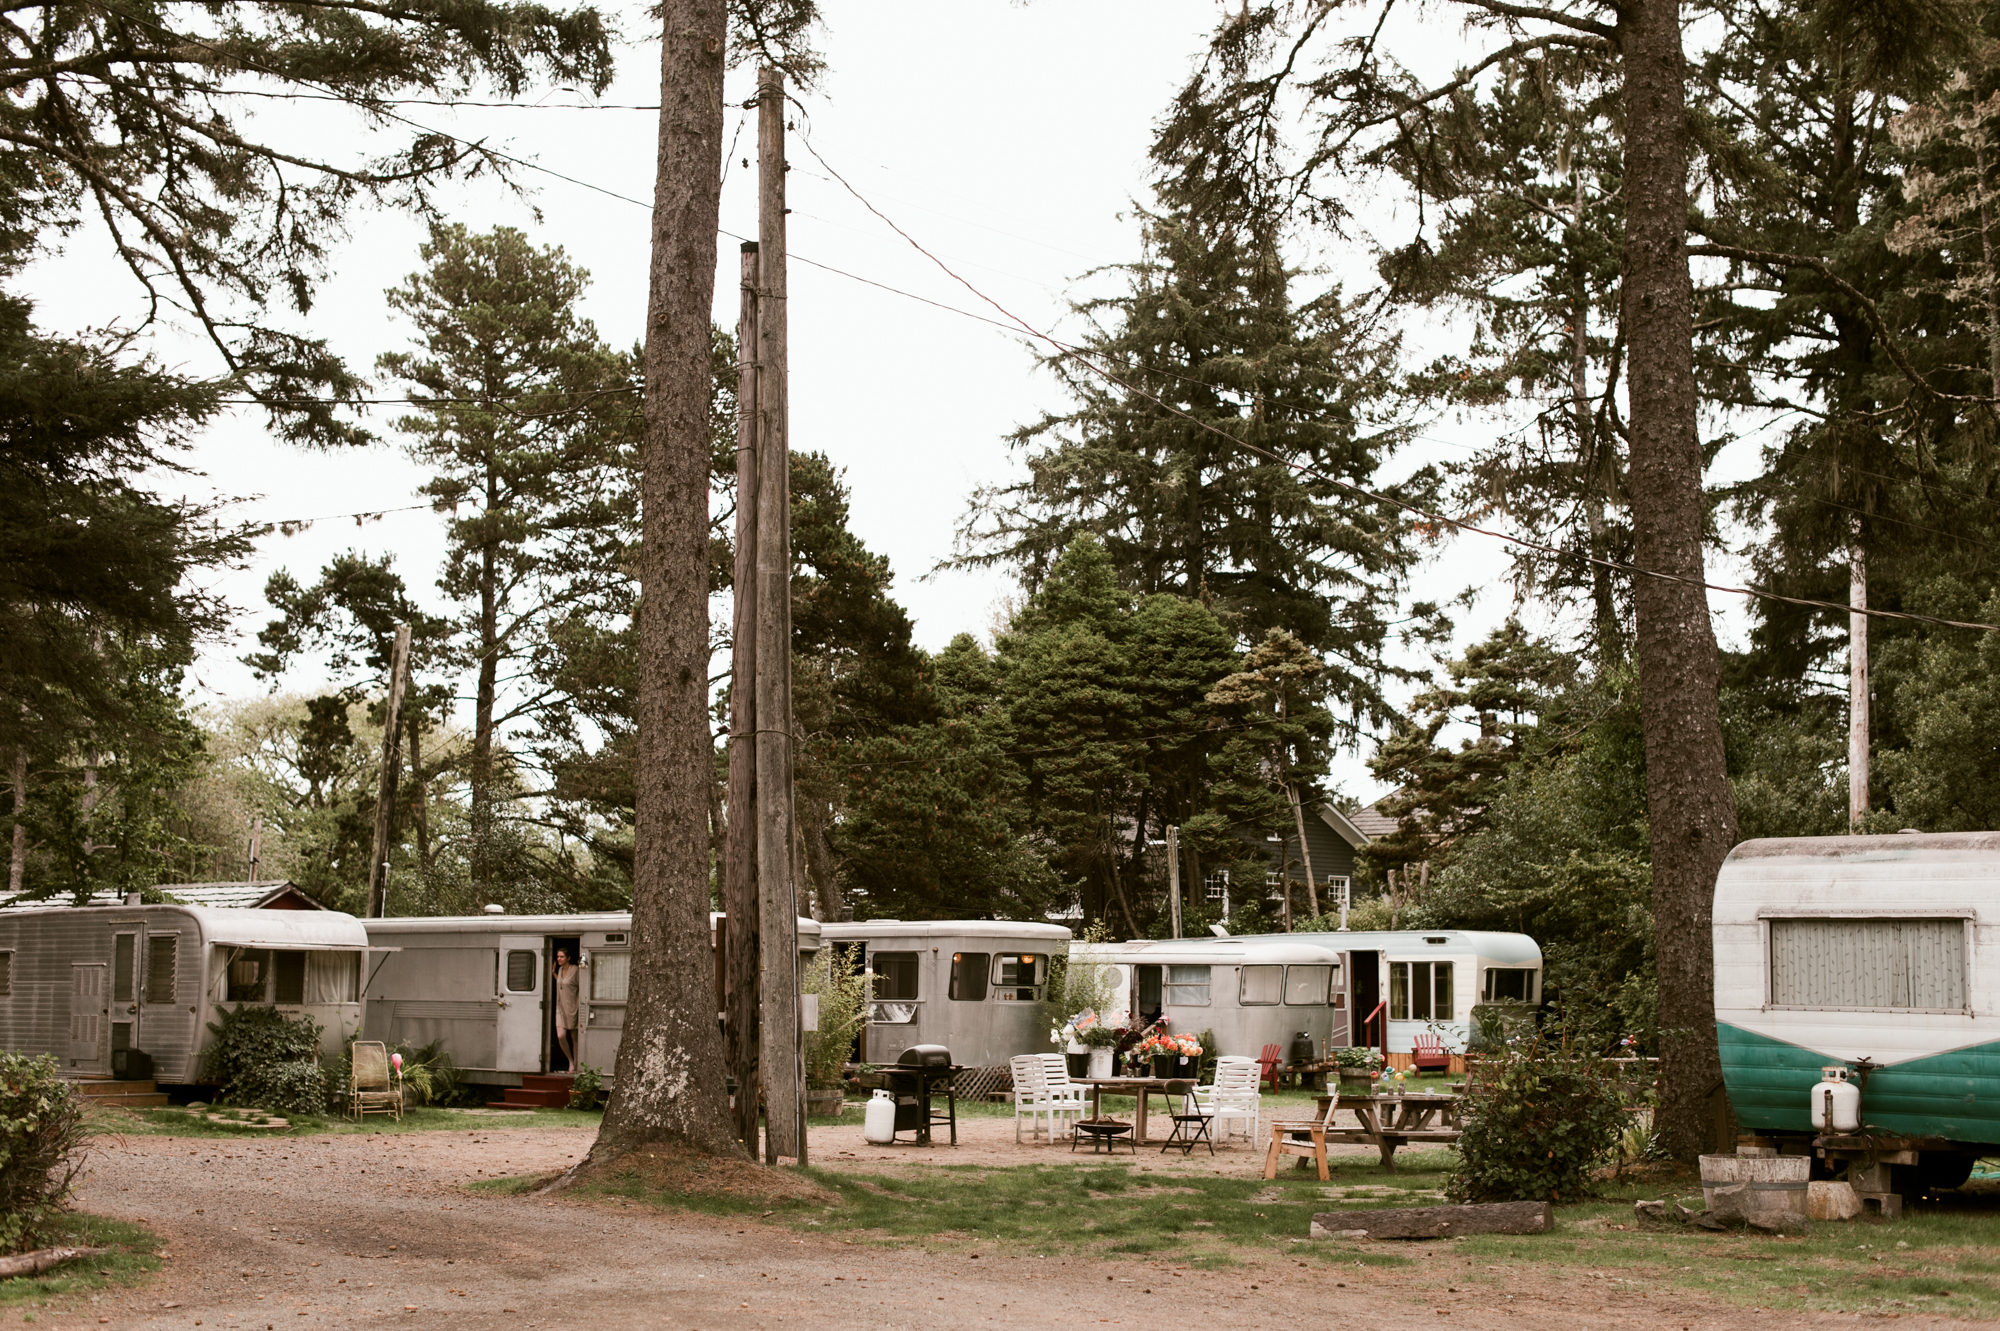 Trailers at the Sou'Wester resort. By Long Beach, Washington wedding photographer Briana Morrison